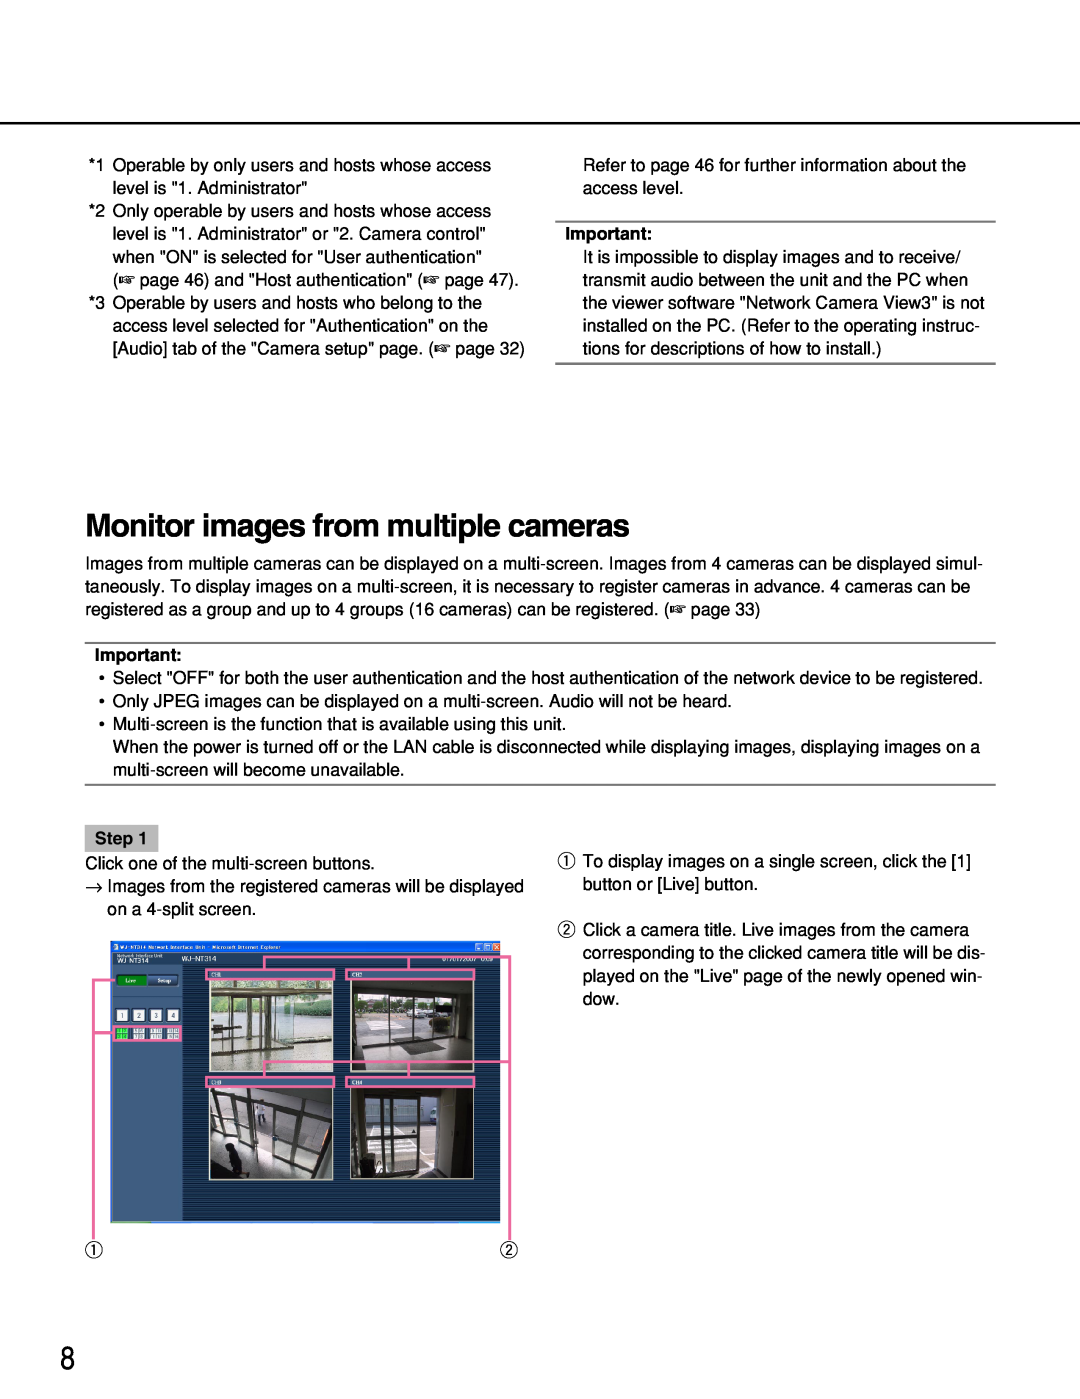 Panasonic WJ-NT314 manual Monitor images from multiple cameras, Step 